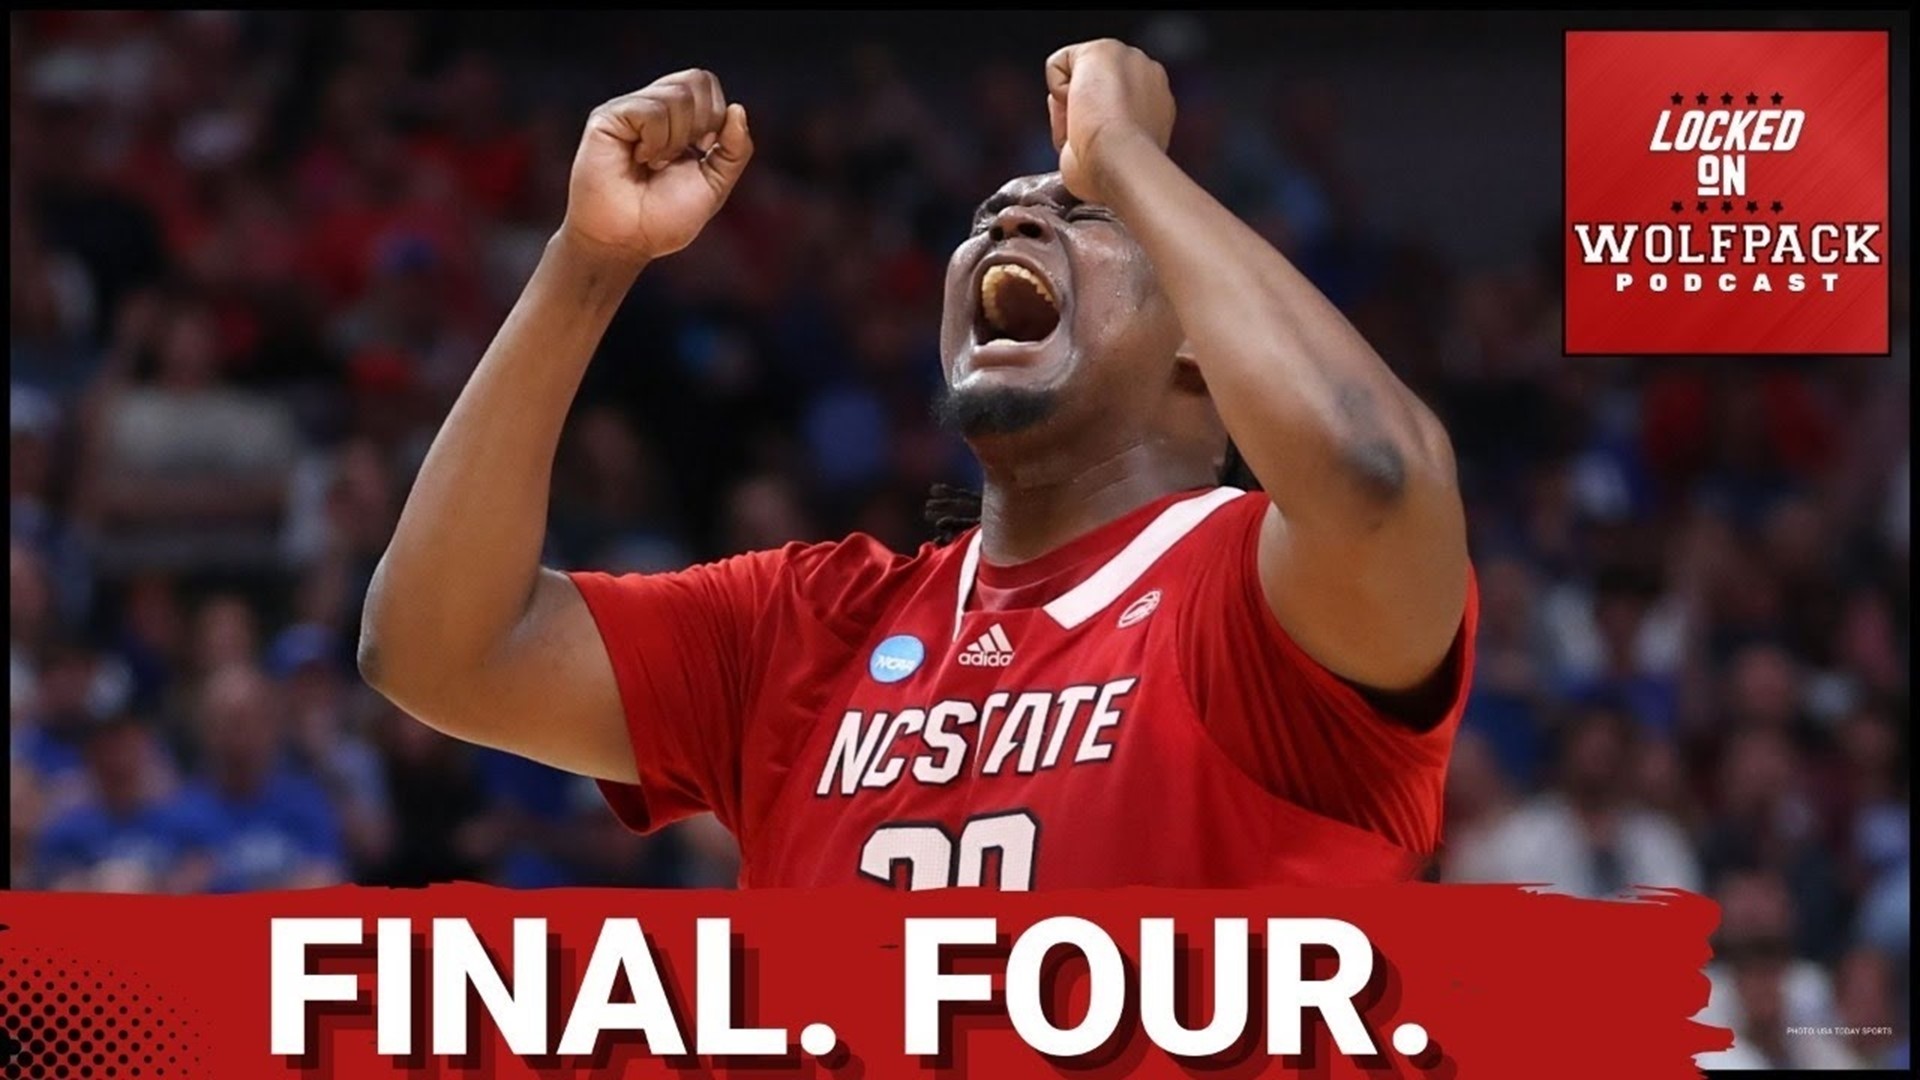 IT HAPPENED. NC STATE BASKETBALL IS GOING BACK TO THE FINAL FOUR.